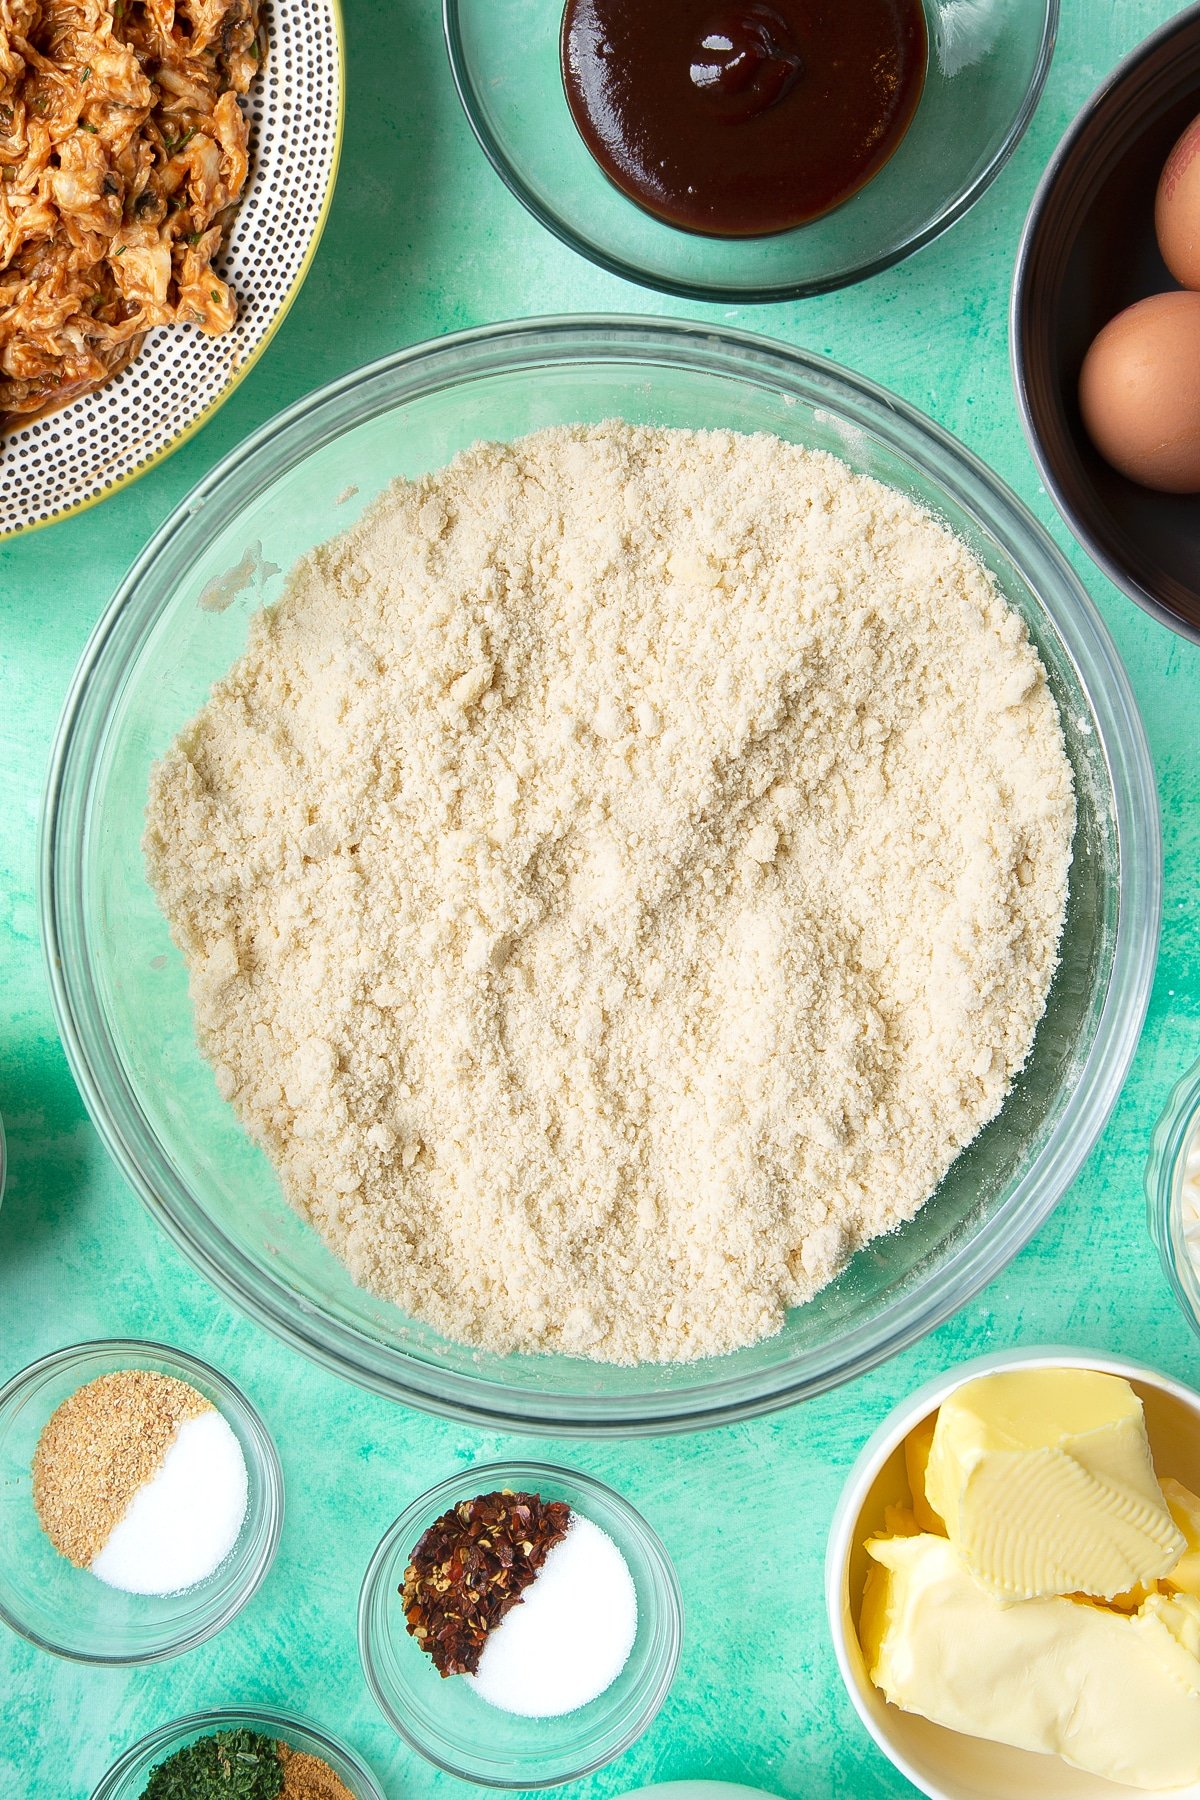 Flour and butter rubbed together in a glass mixing bowl. Ingredients to make chicken doughnuts surround the bowl.